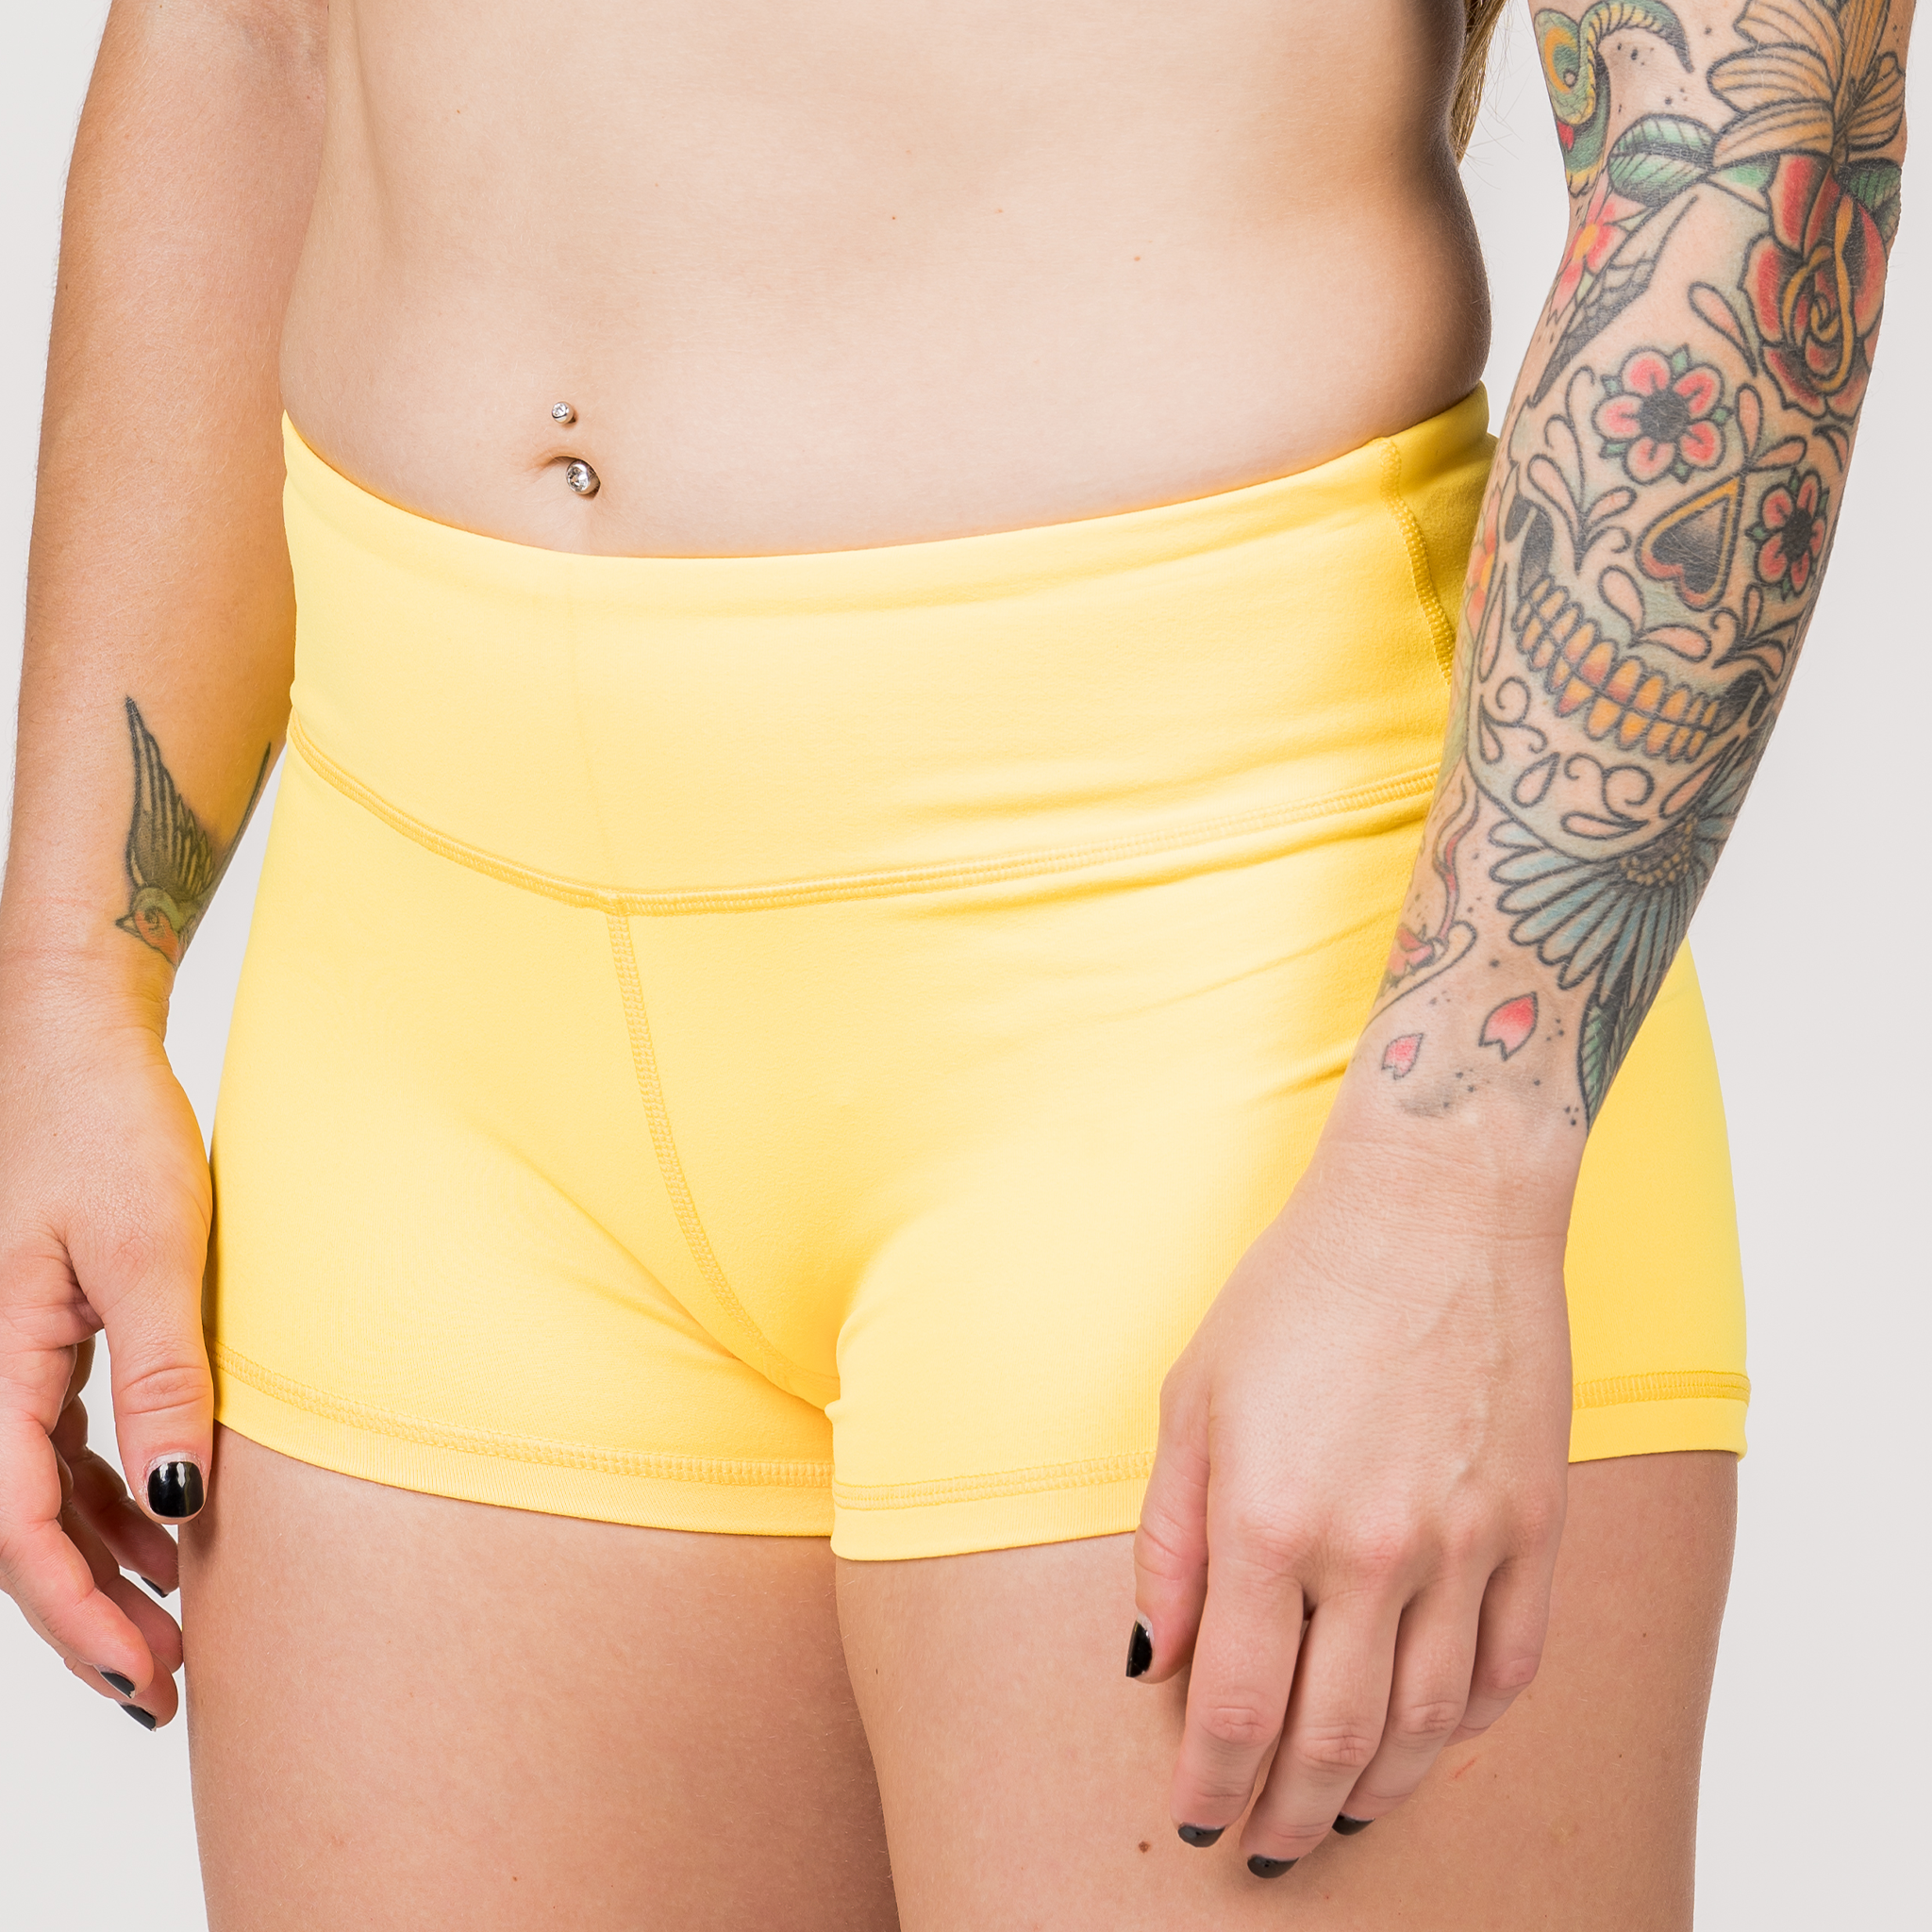 Gym Shorts for Women - High Waisted - Butt Lifting Yoga Pants - Mustard, Shop Today. Get it Tomorrow!